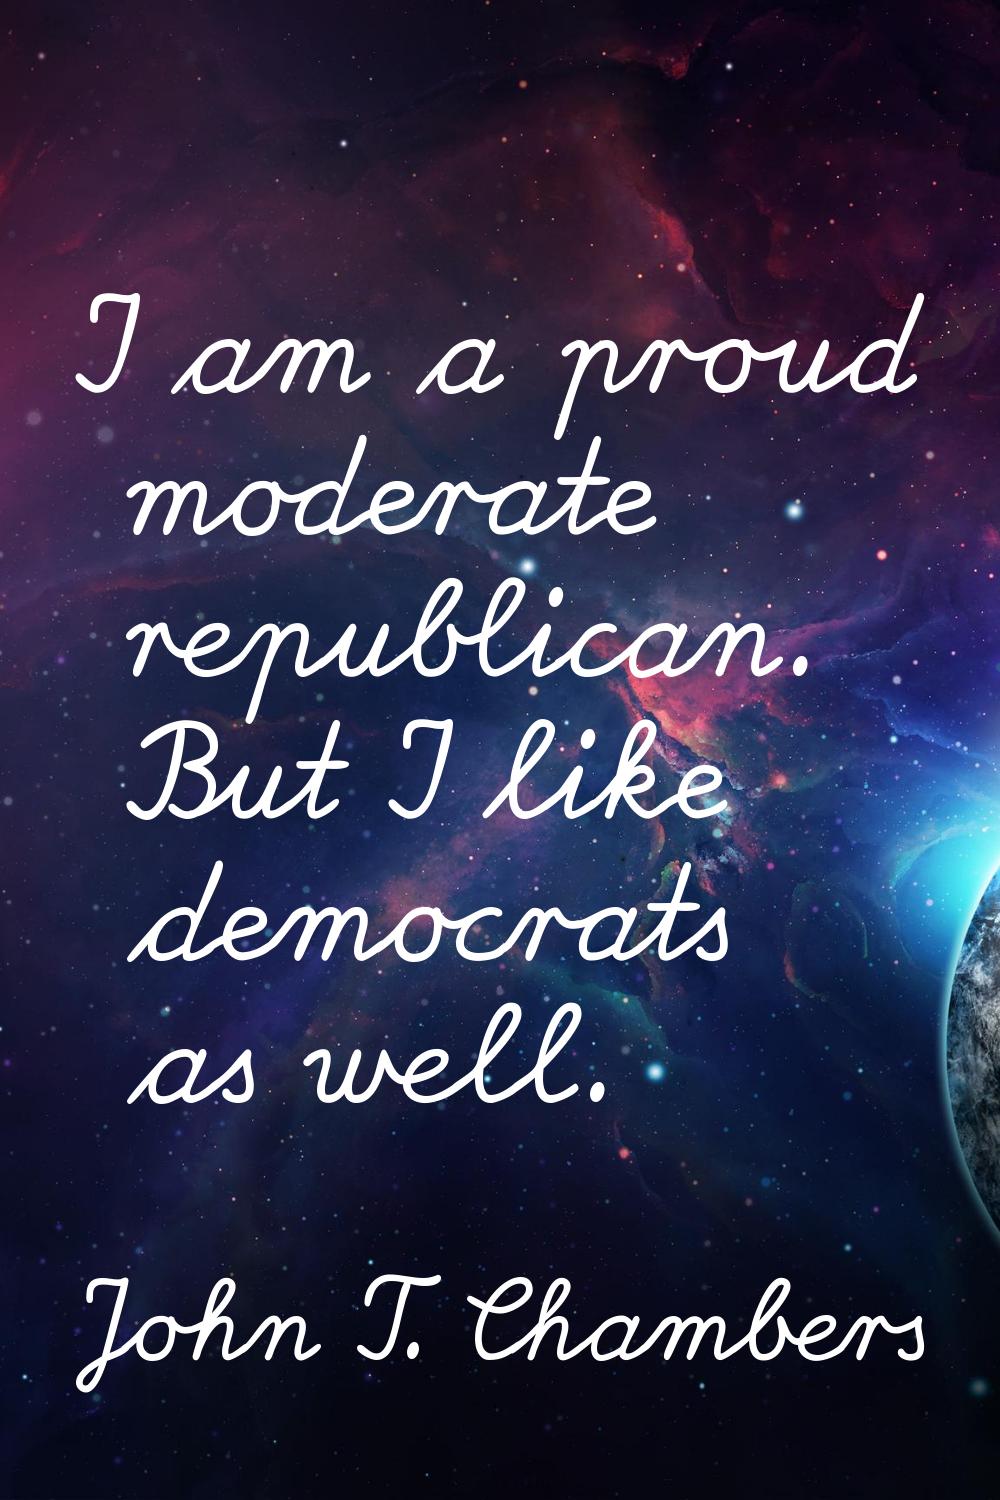 I am a proud moderate republican. But I like democrats as well.